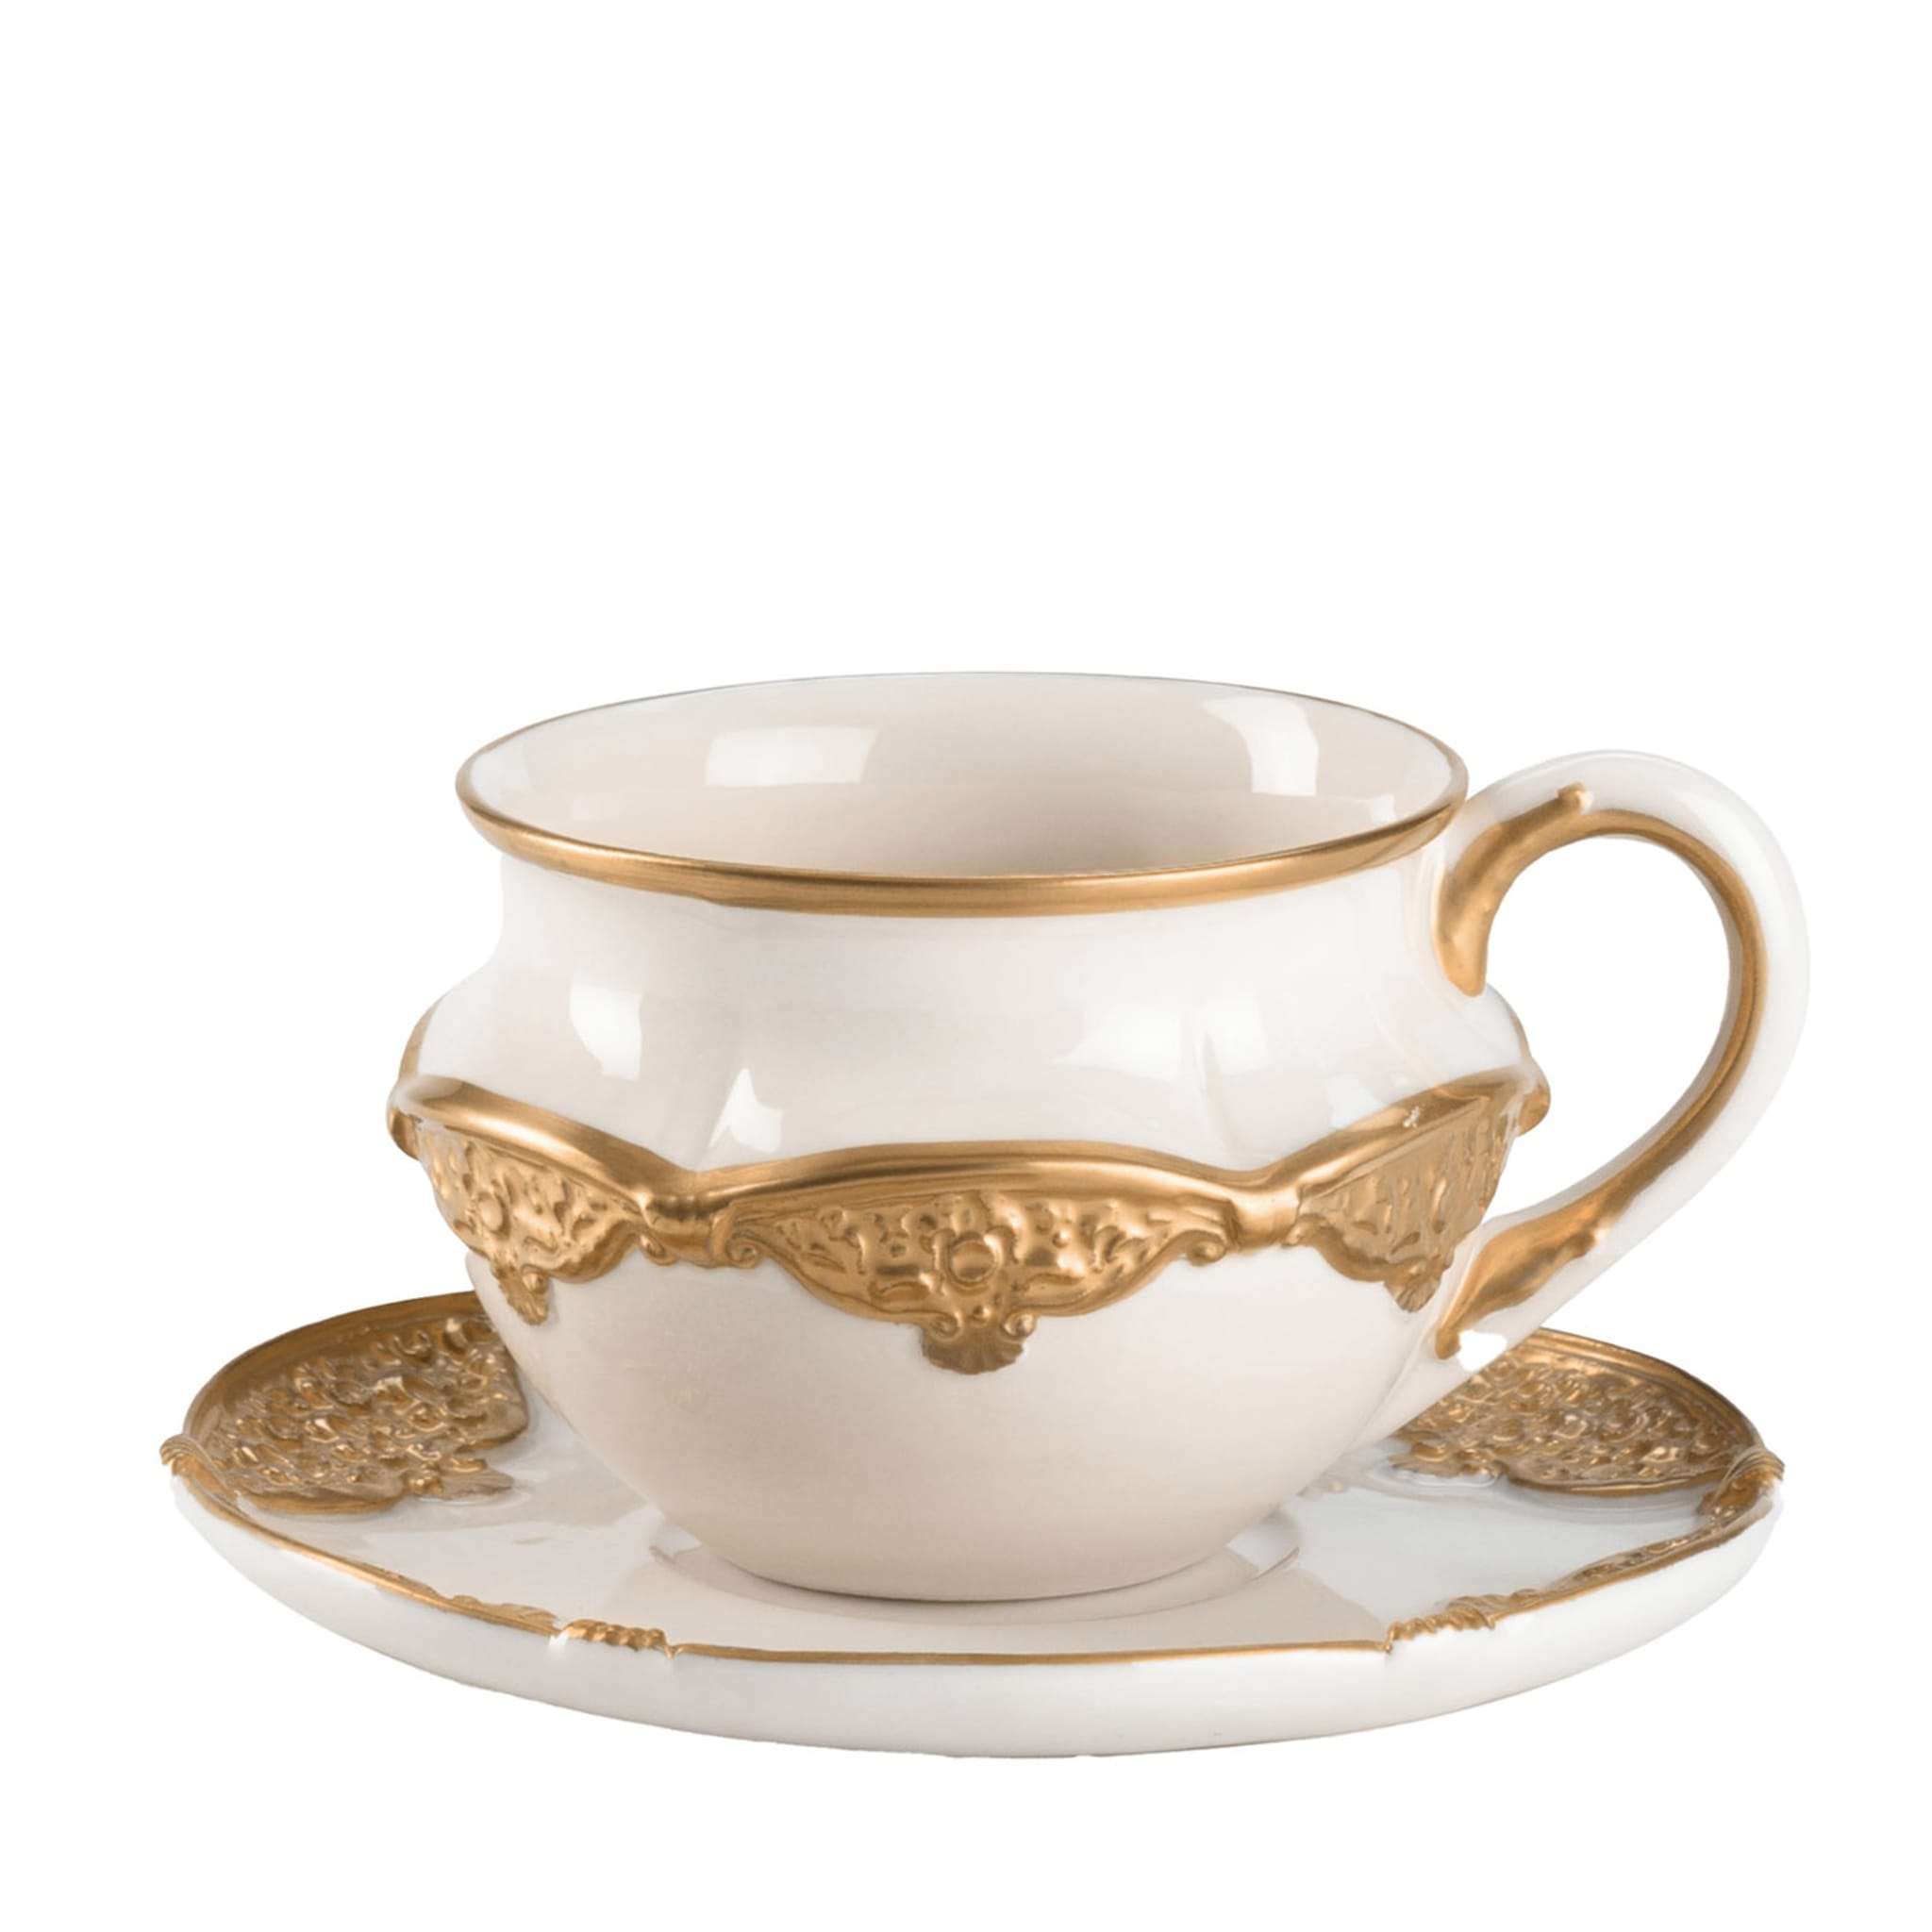 Caterina Small White & Gold Tea Cup with Saucer - Main view